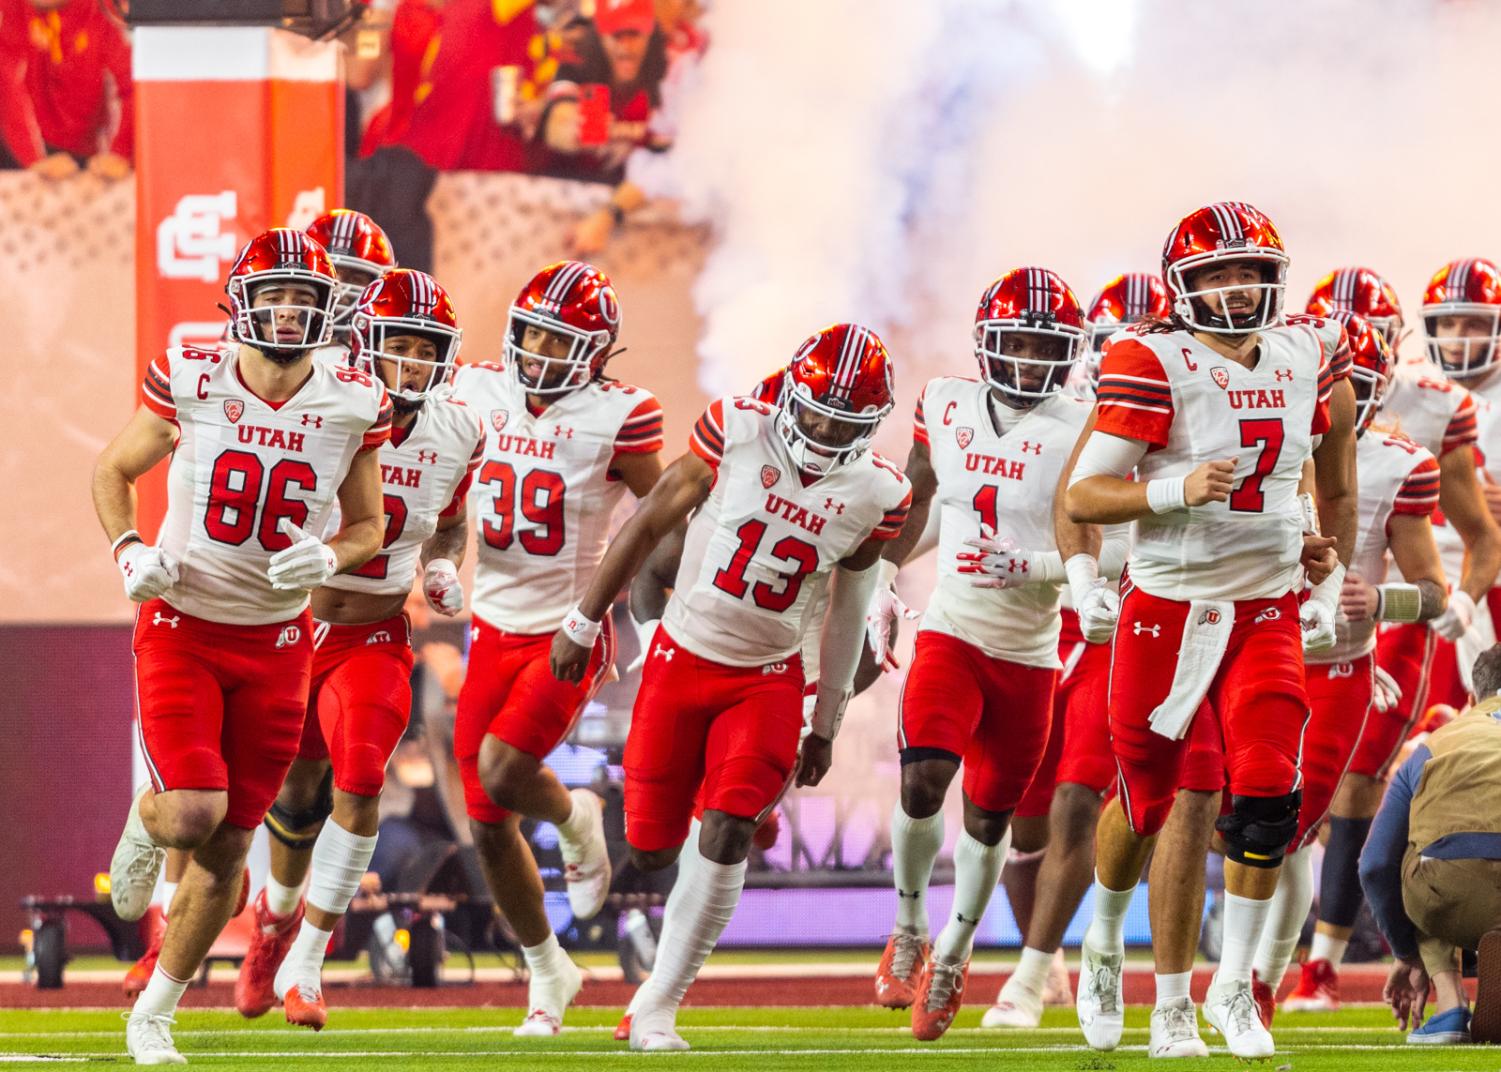 Utah clinches Pac-12 South Championship with big win over Ducks - Block U